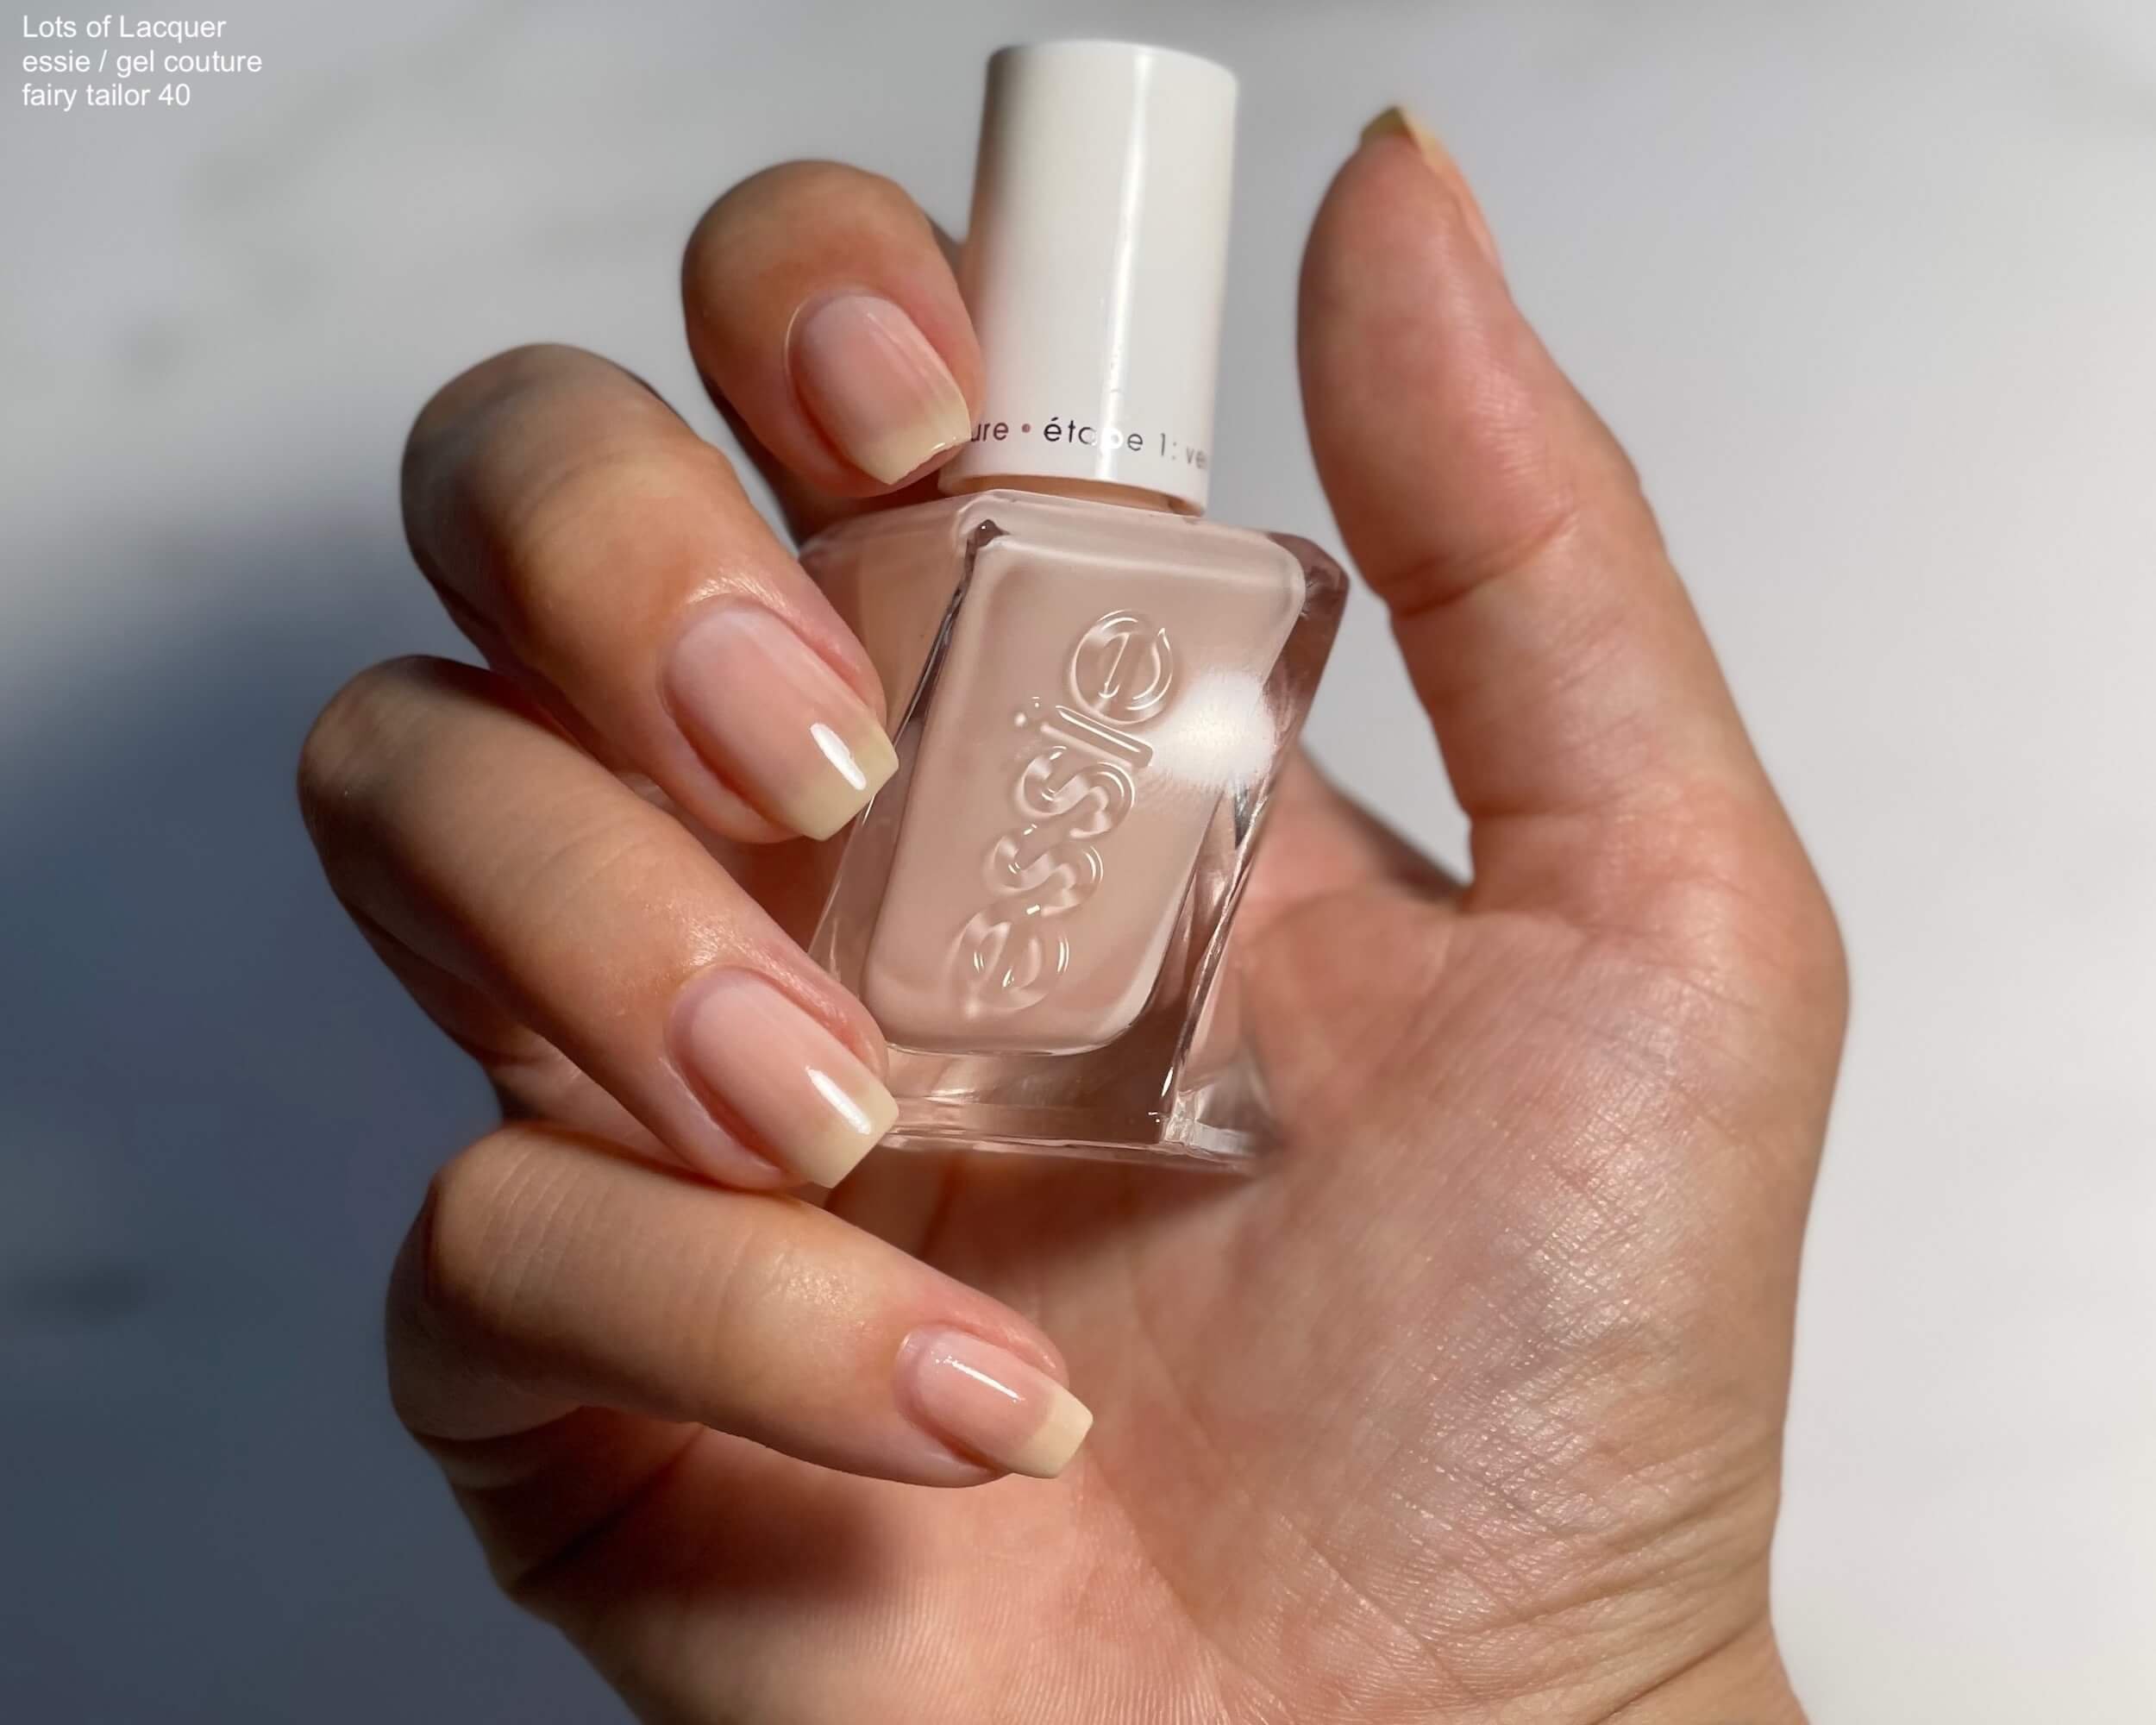 10. Essie Gel Couture in "Fairy Tailor" - wide 9